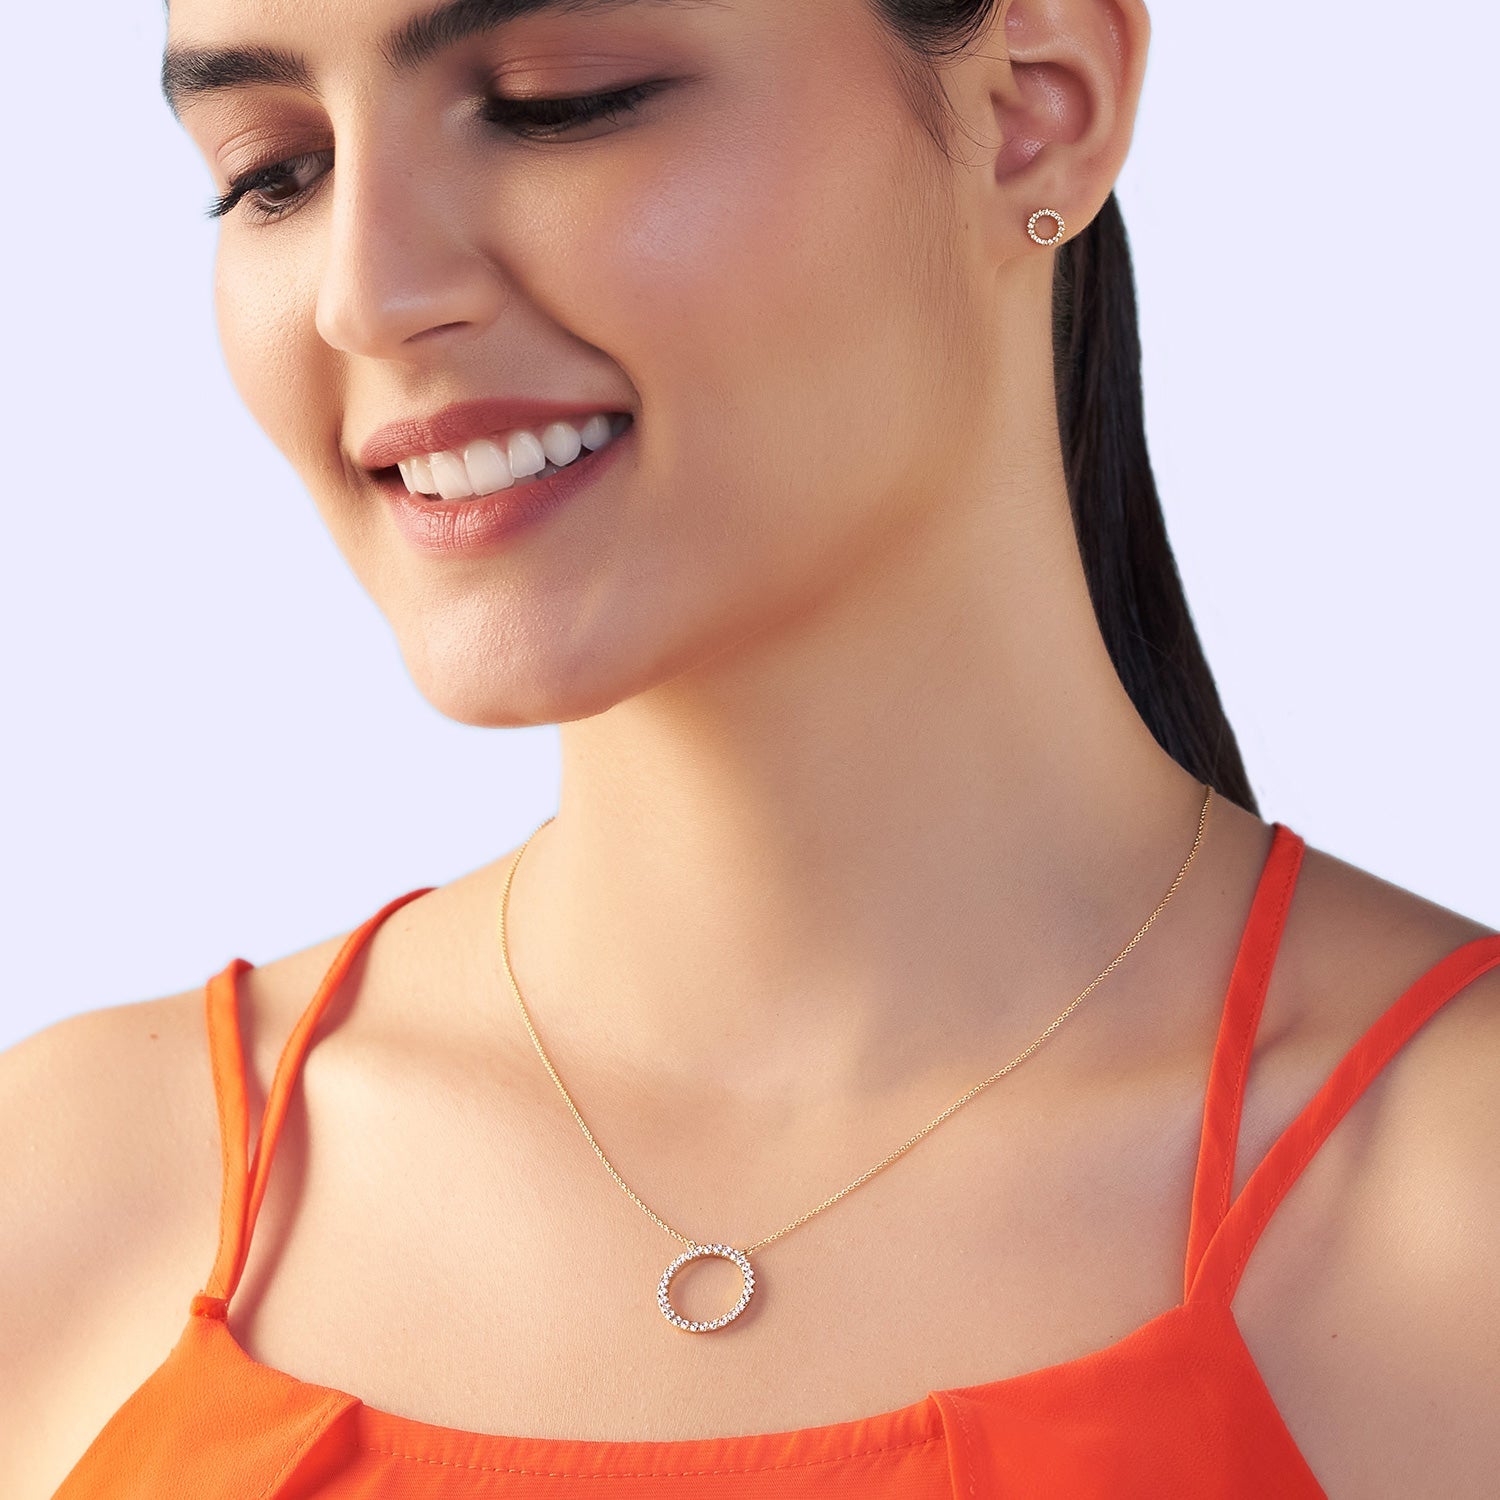 Circular Silhouette Necklace_Product Angle_Lifestyle Image